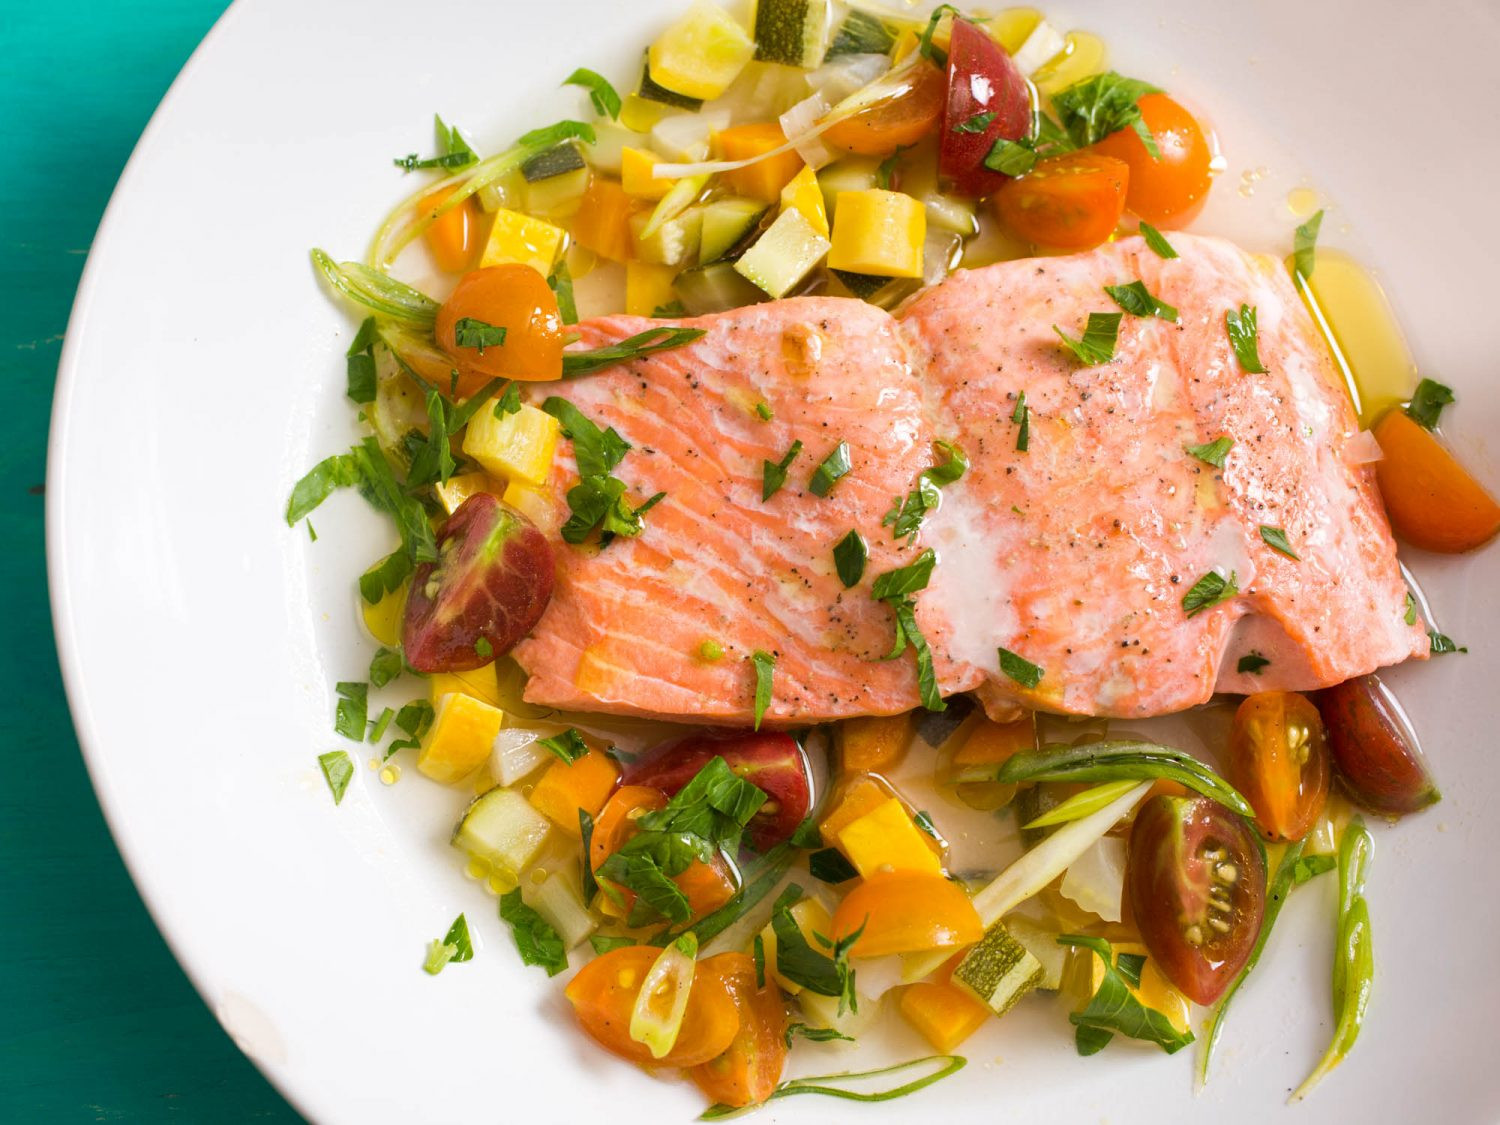 Healthy Side Dishes For Salmon
 What to Serve With Salmon Tried and True Side Dishes for